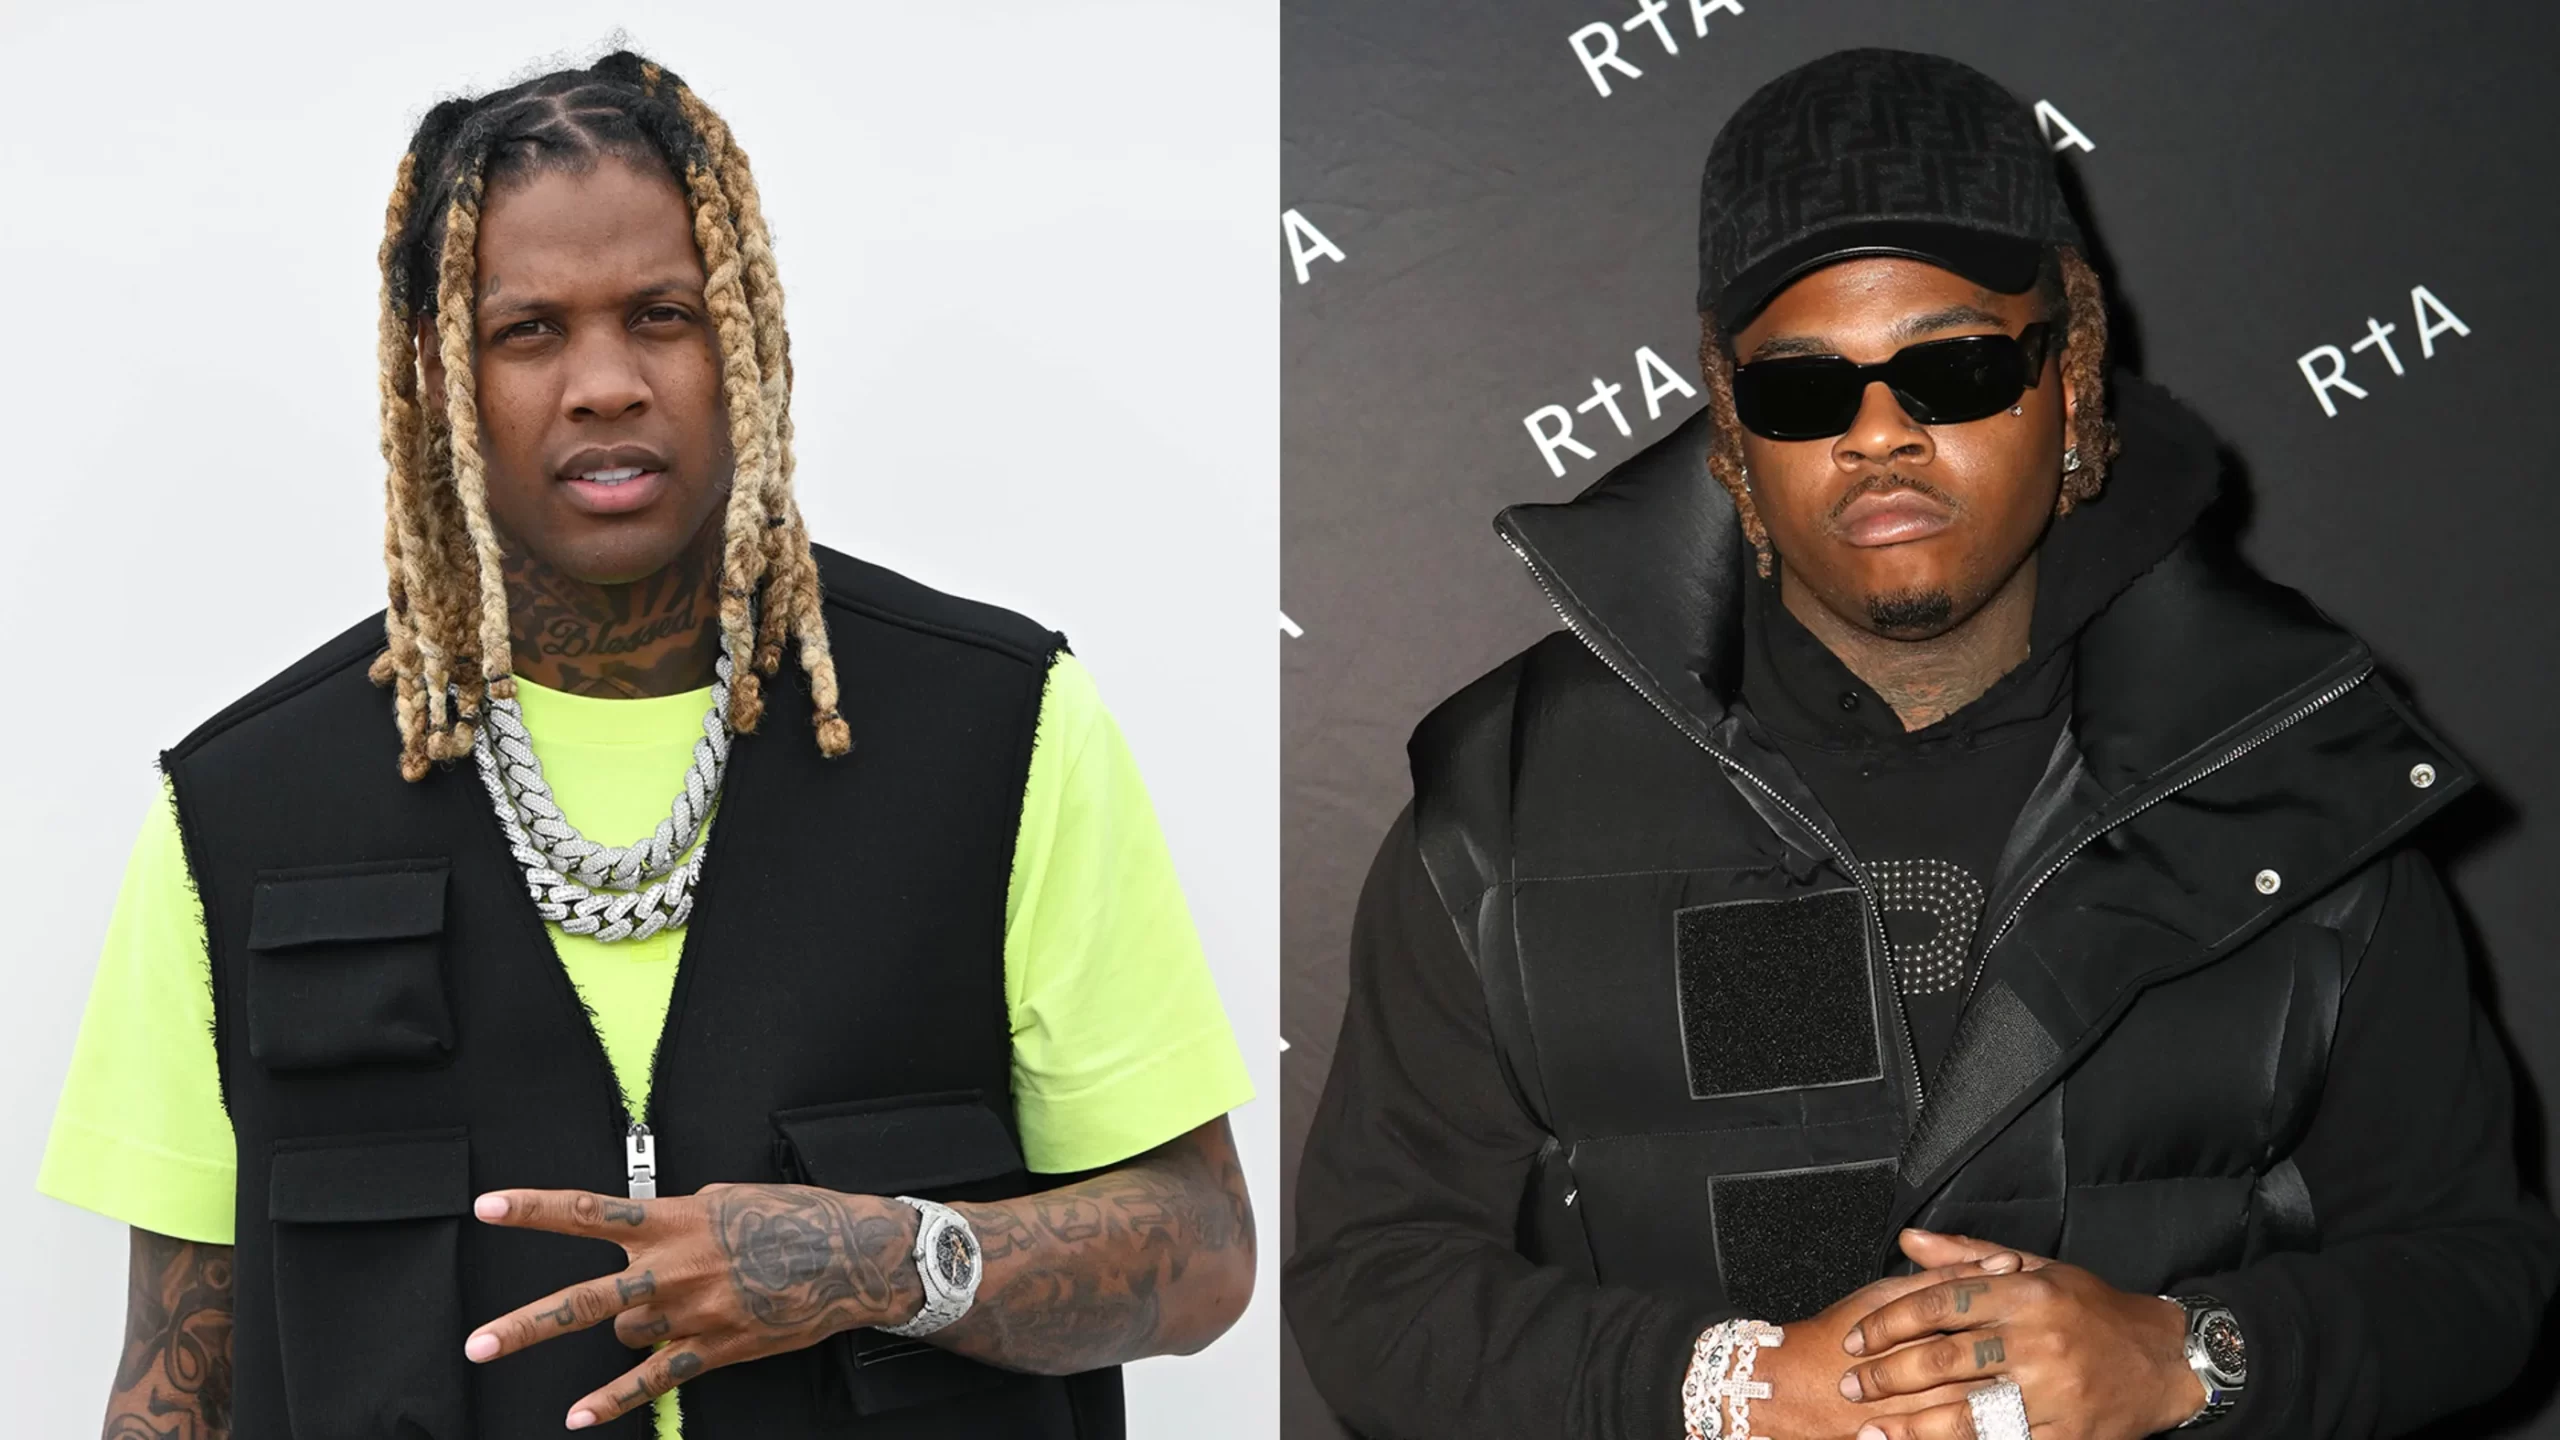 Lil Durk's Upcoming Song Sparks Speculation of Diss towards Gunna in Light of YSL RICO Case Plea Deal